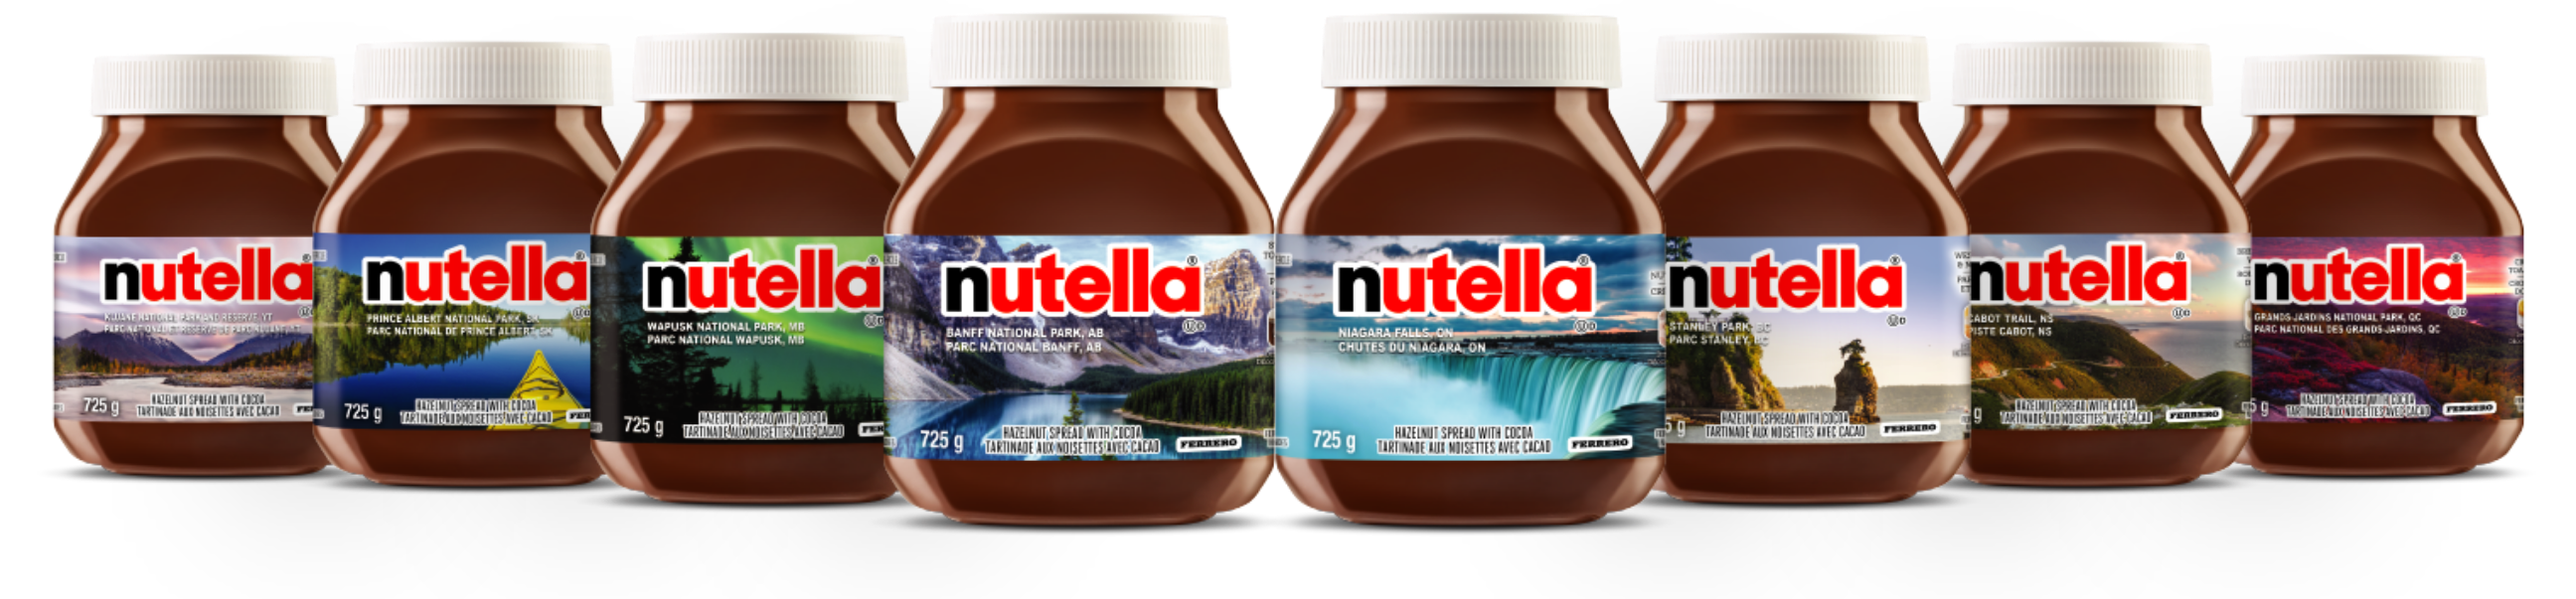 8 specially marked Nutella products